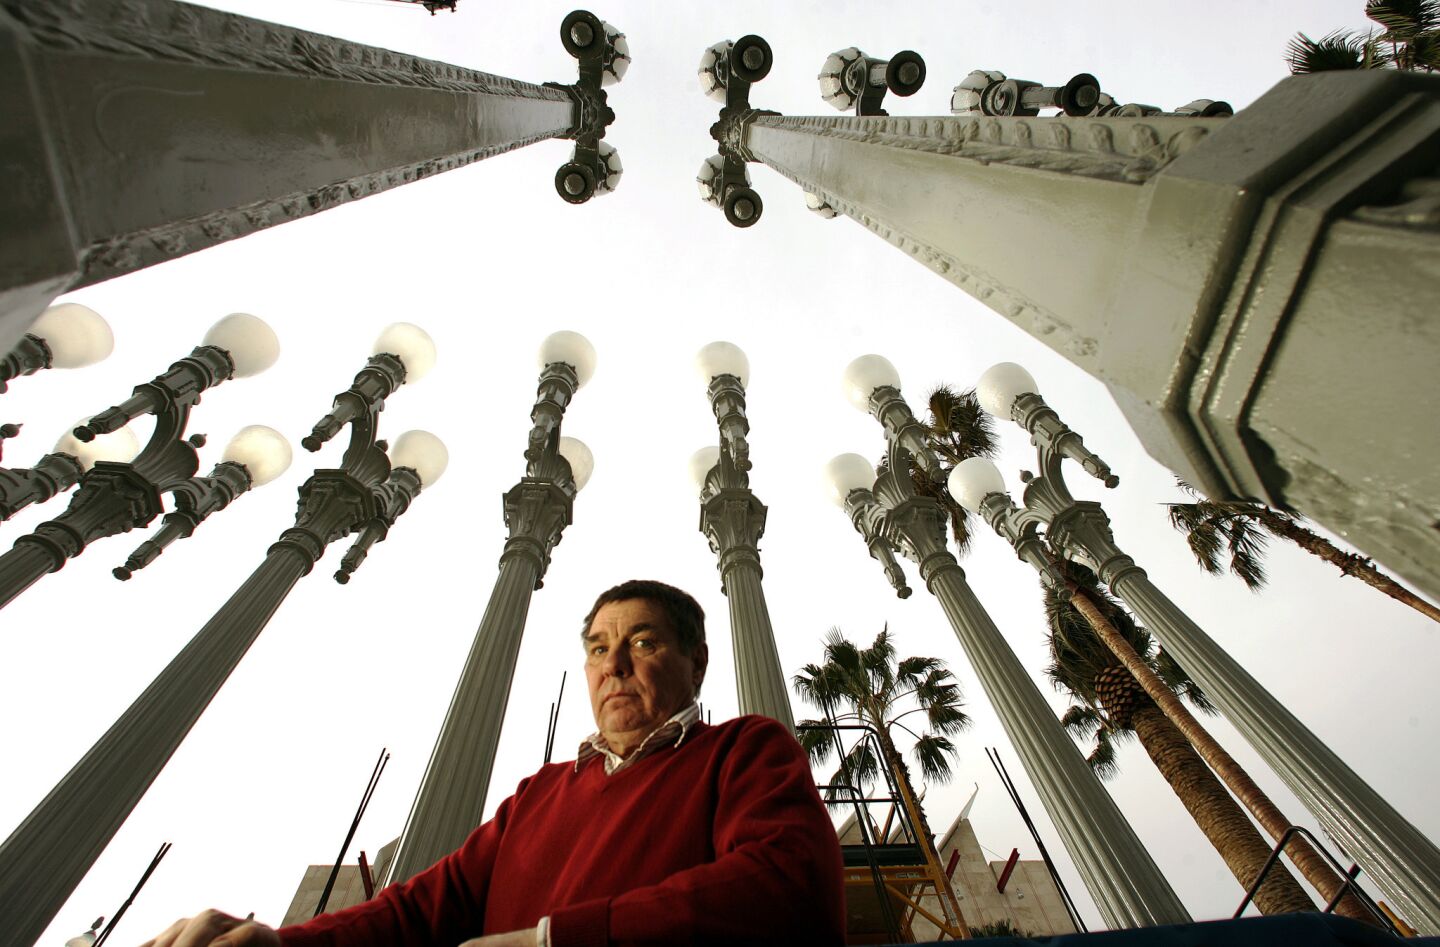 The conceptual artist left a long-lasting legacy with "Urban Light," the ranks of vintage lampposts tightly arrayed outside the Los Angeles County Museum of Art. Installed in 2008, it rapidly became something of an L.A. symbol. Burden was 69. Full obituary